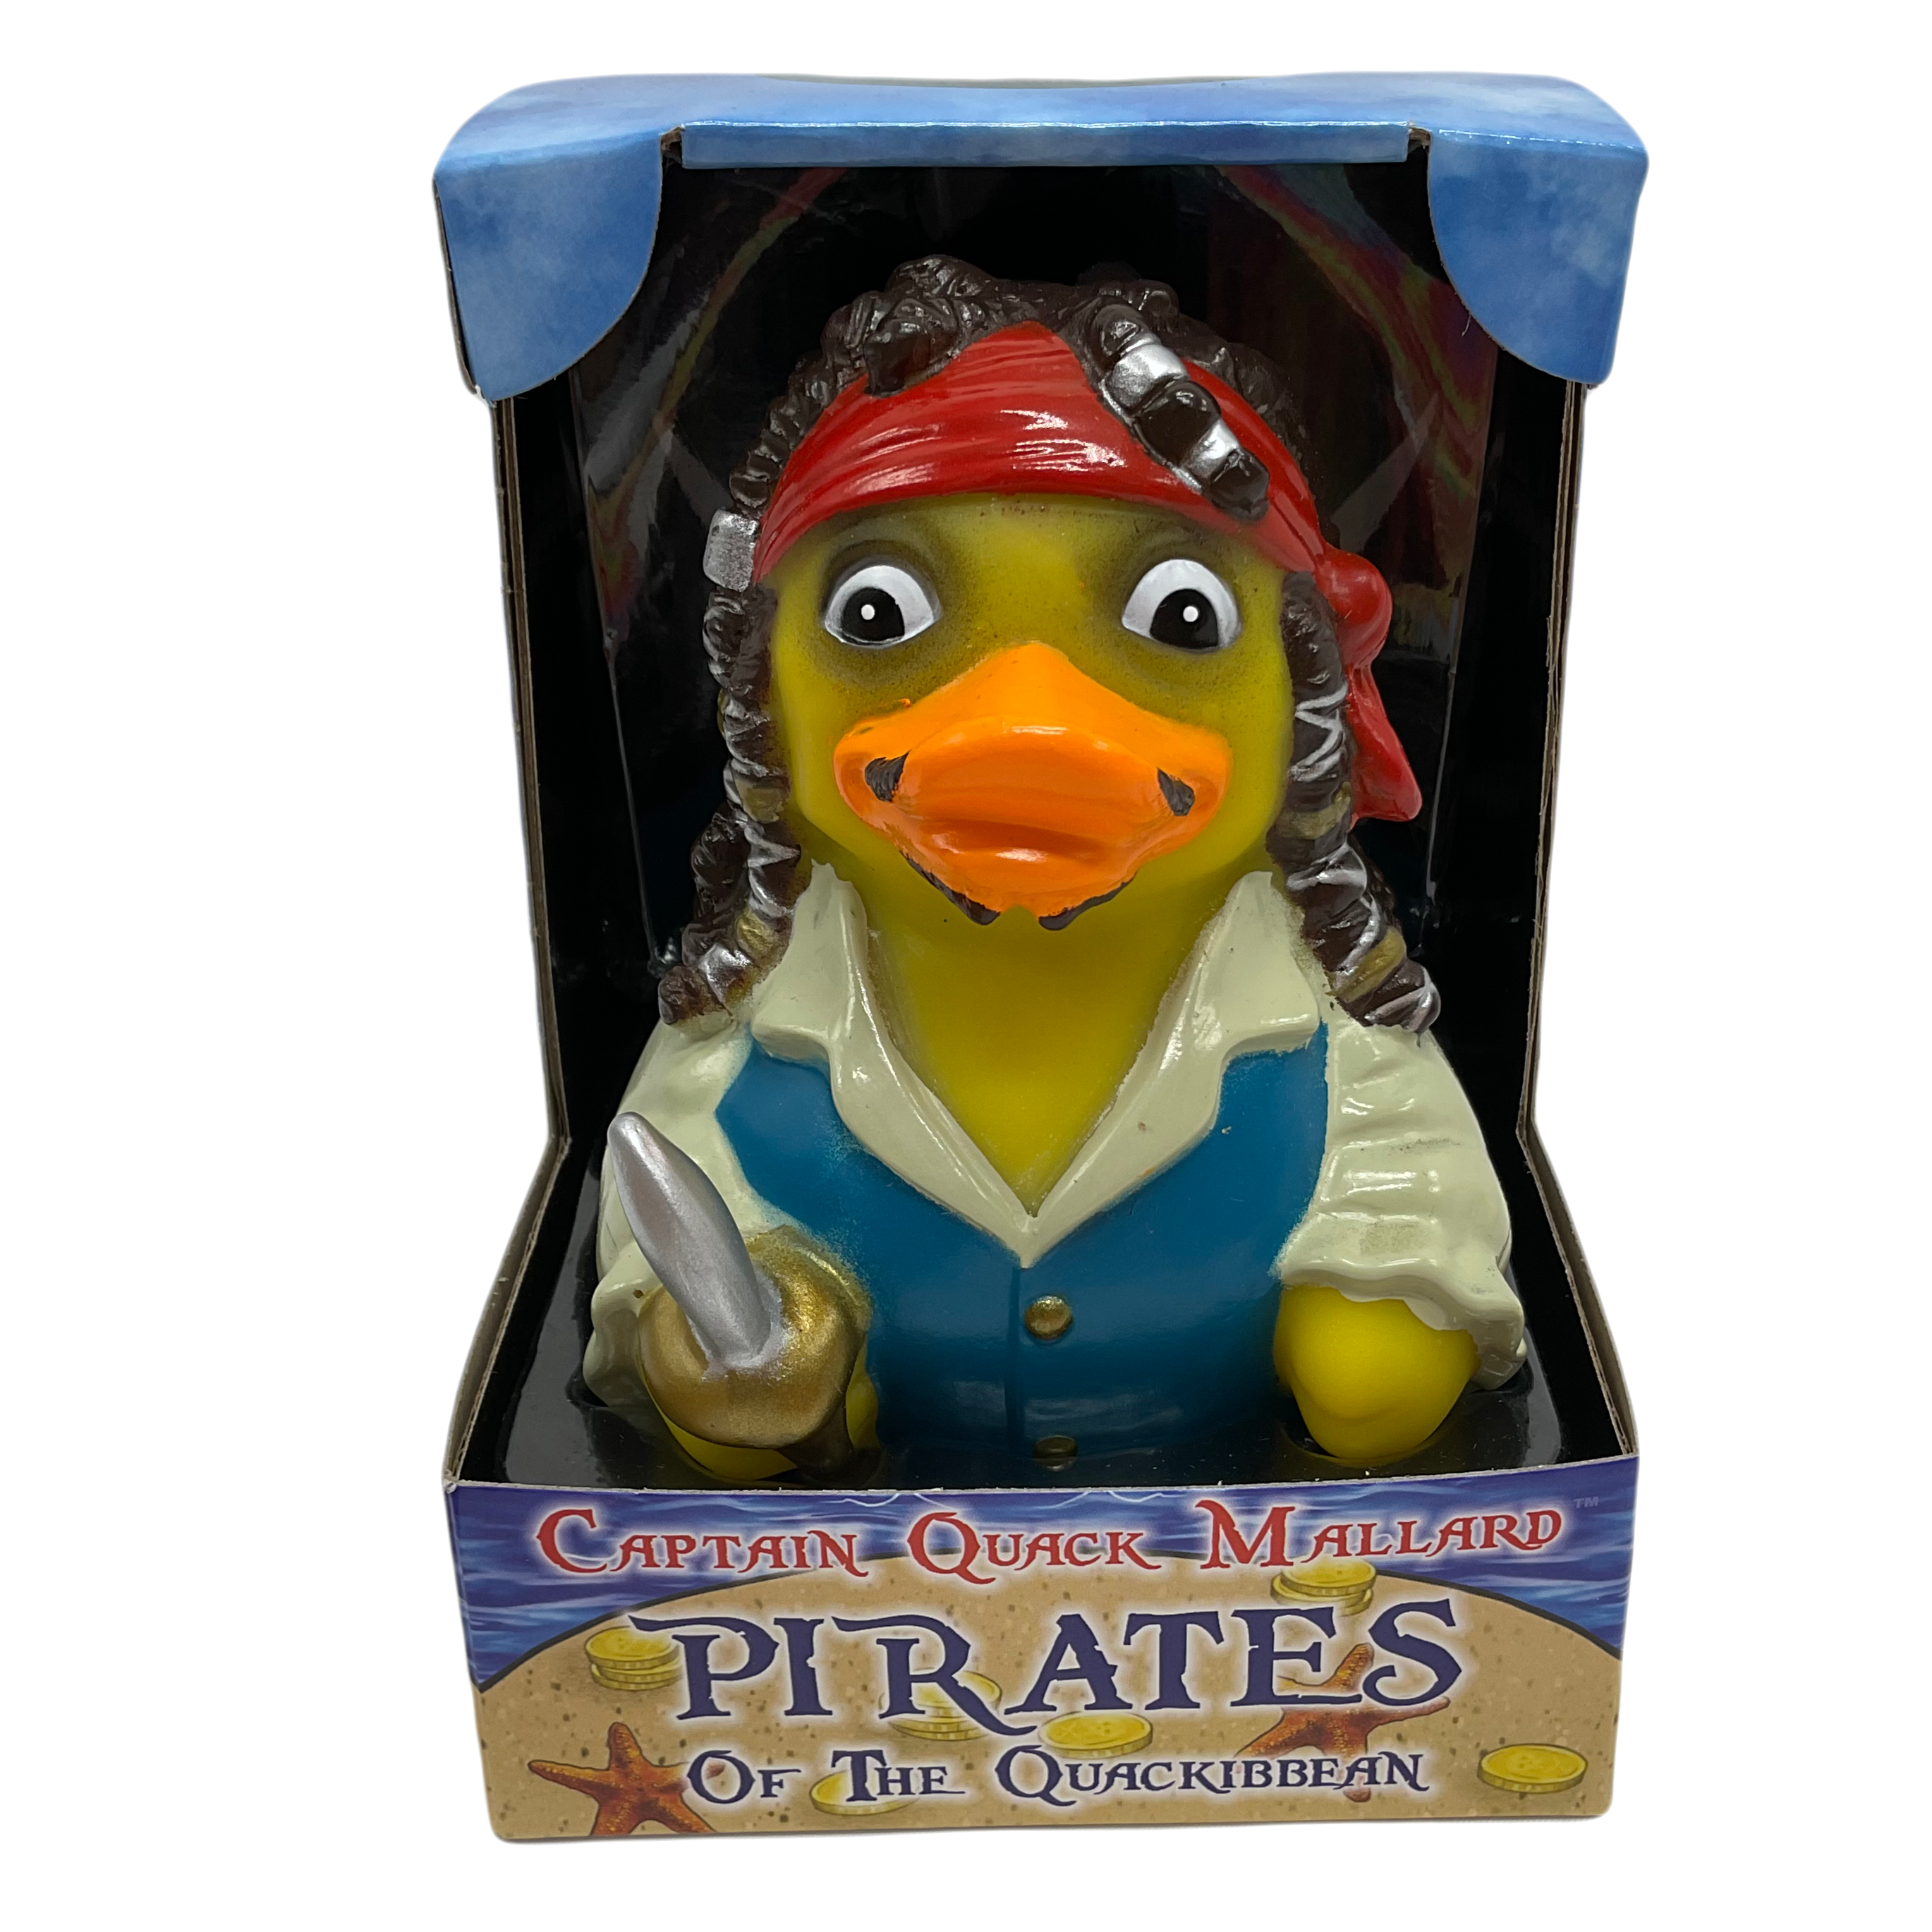 Celebriducks Captain Hook Rubber Duck Bath Toy - Bring Tranquility and Playfulness to Bath Time with This Whimsical and Collectible Rubber Duck Toy